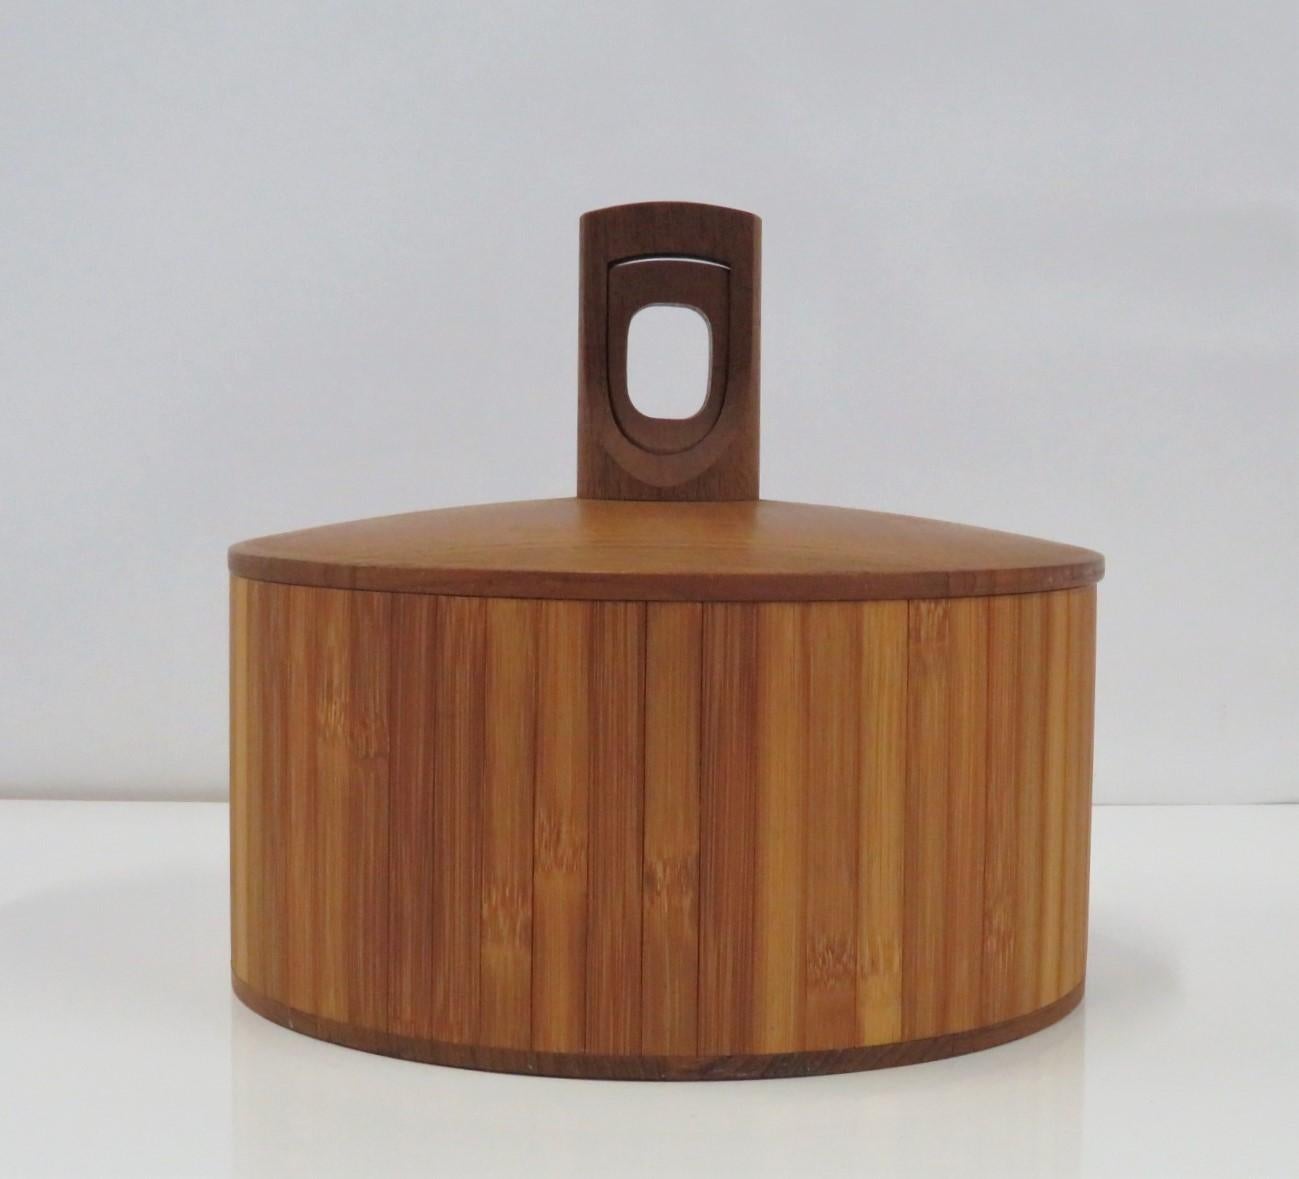 Seldom seen bamboo and teak ice bucket by Jens Quistgaard for Dansk from the Two Woods Series from early 1960s. The Two Woods ice buckets were made with the finest materials and an exquisite design by Jens Harald Quistgaard. This piece was with a